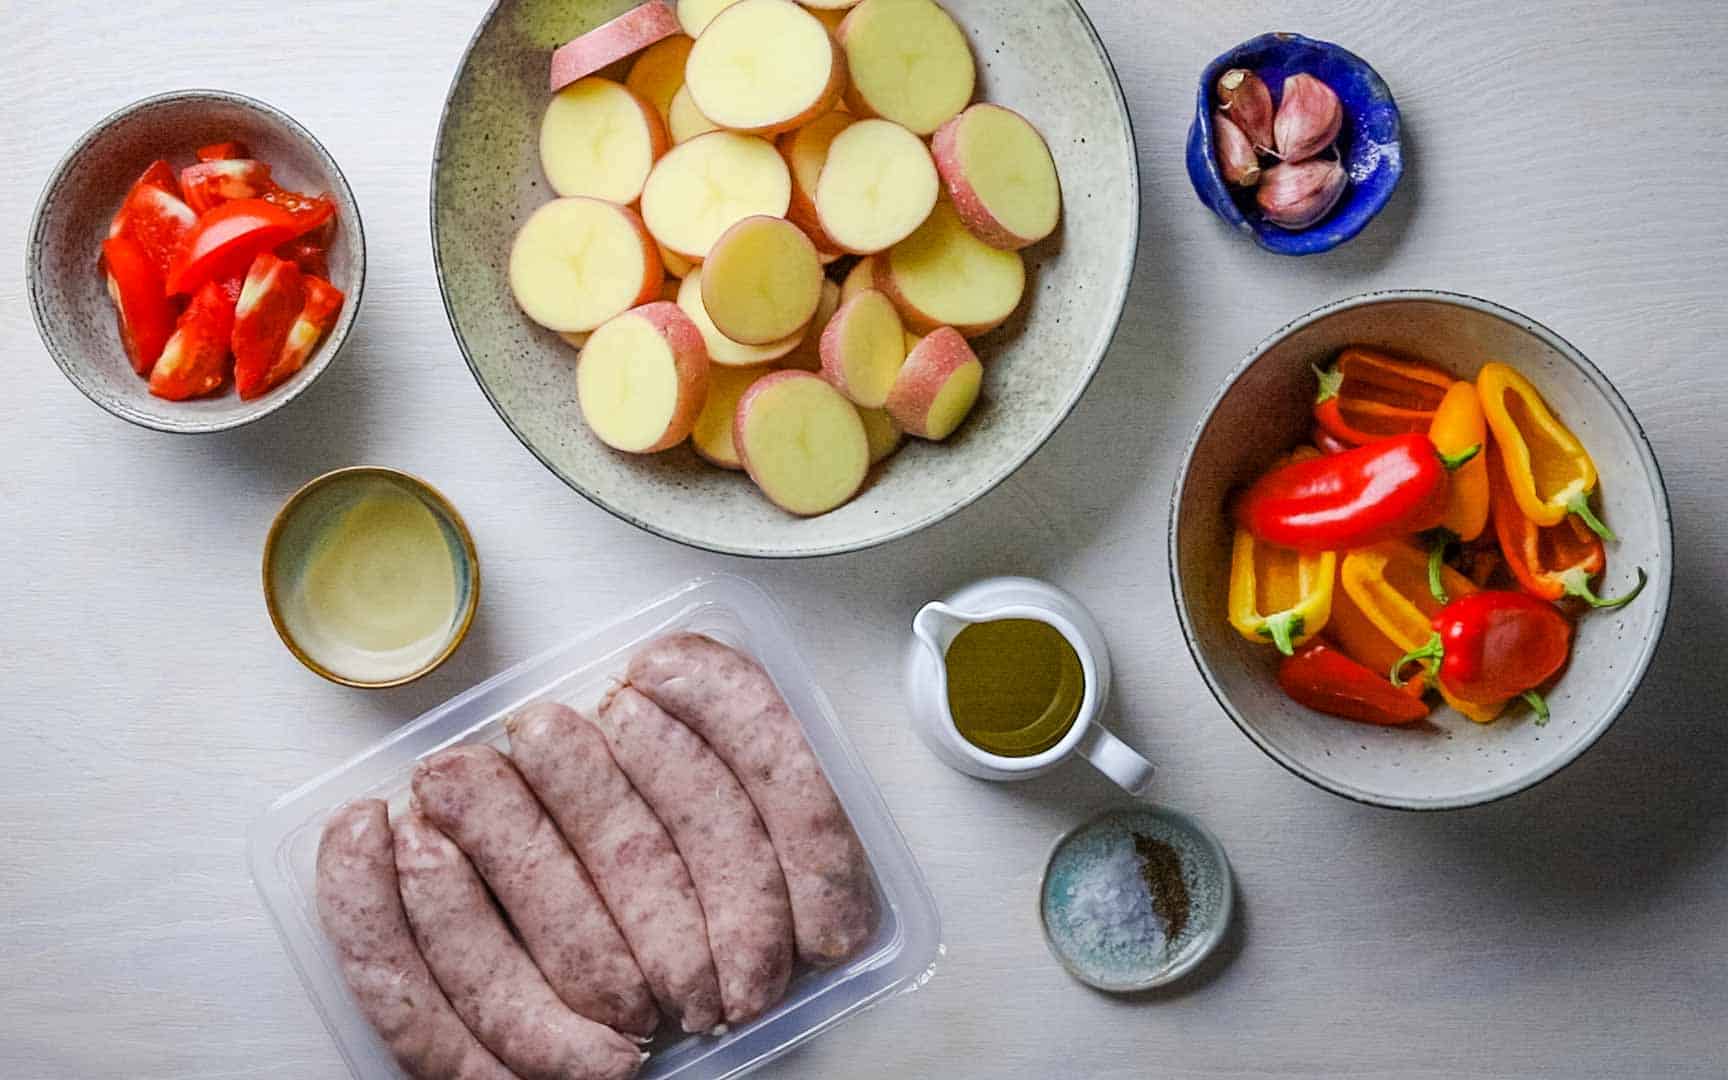 Bowls of chopped tomatoes, potatoes, peppers and garlic on a white wooden countertop, with a tray of raw sausages alongside the bowls.